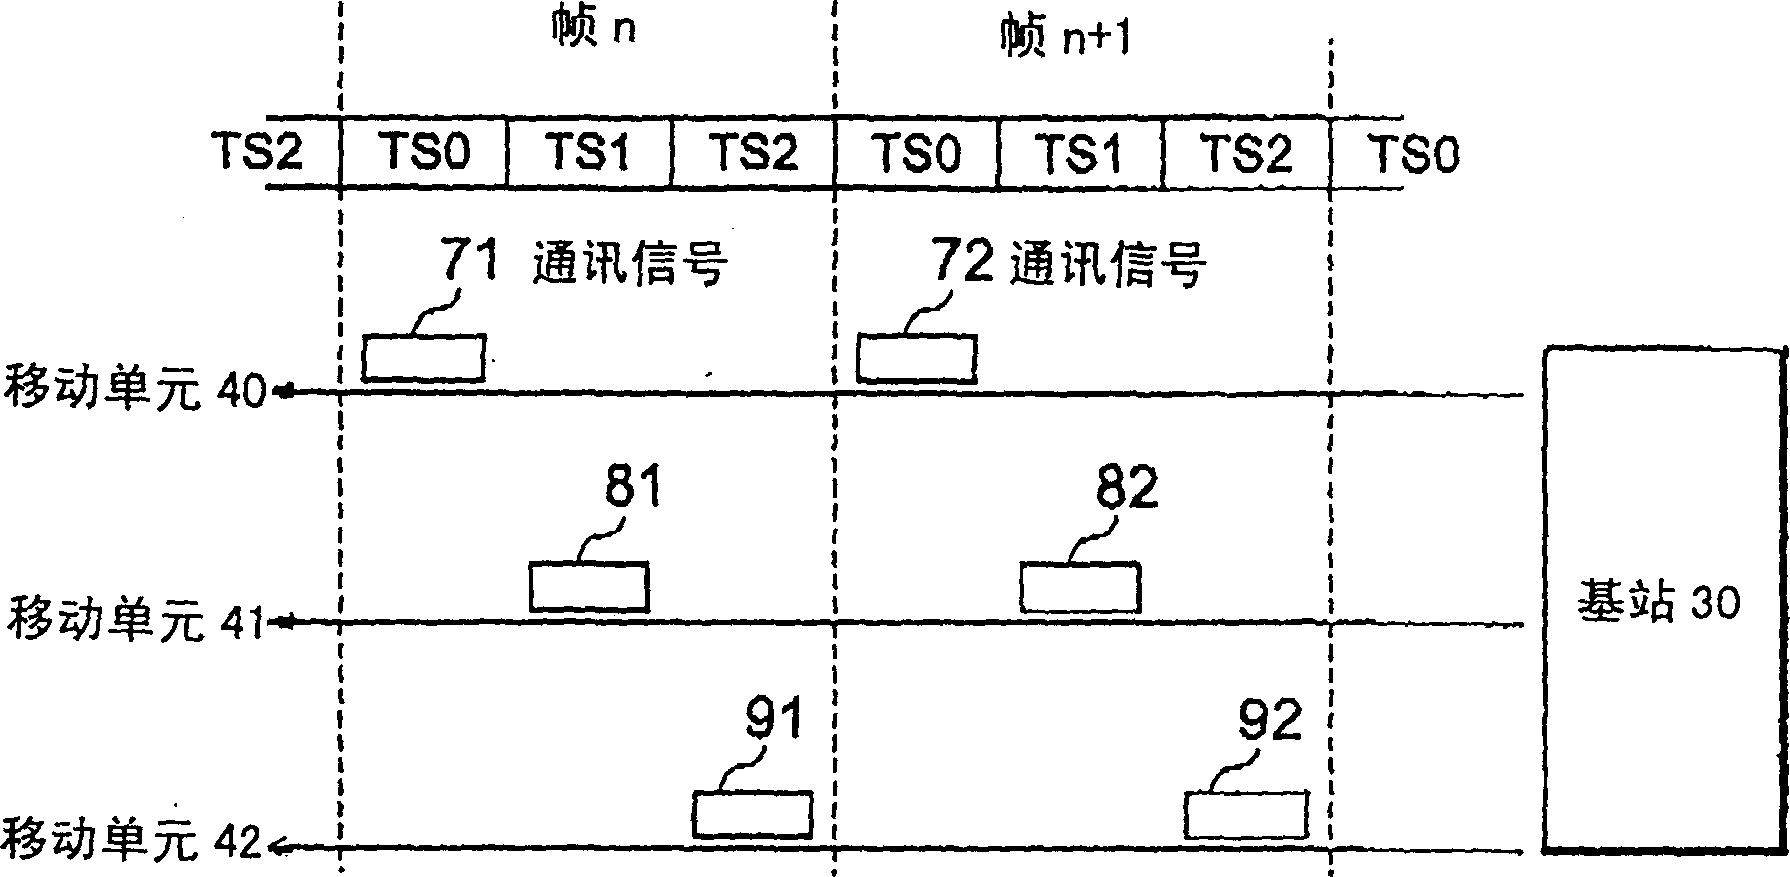 System and method for radio channel communication in CDMA communication system